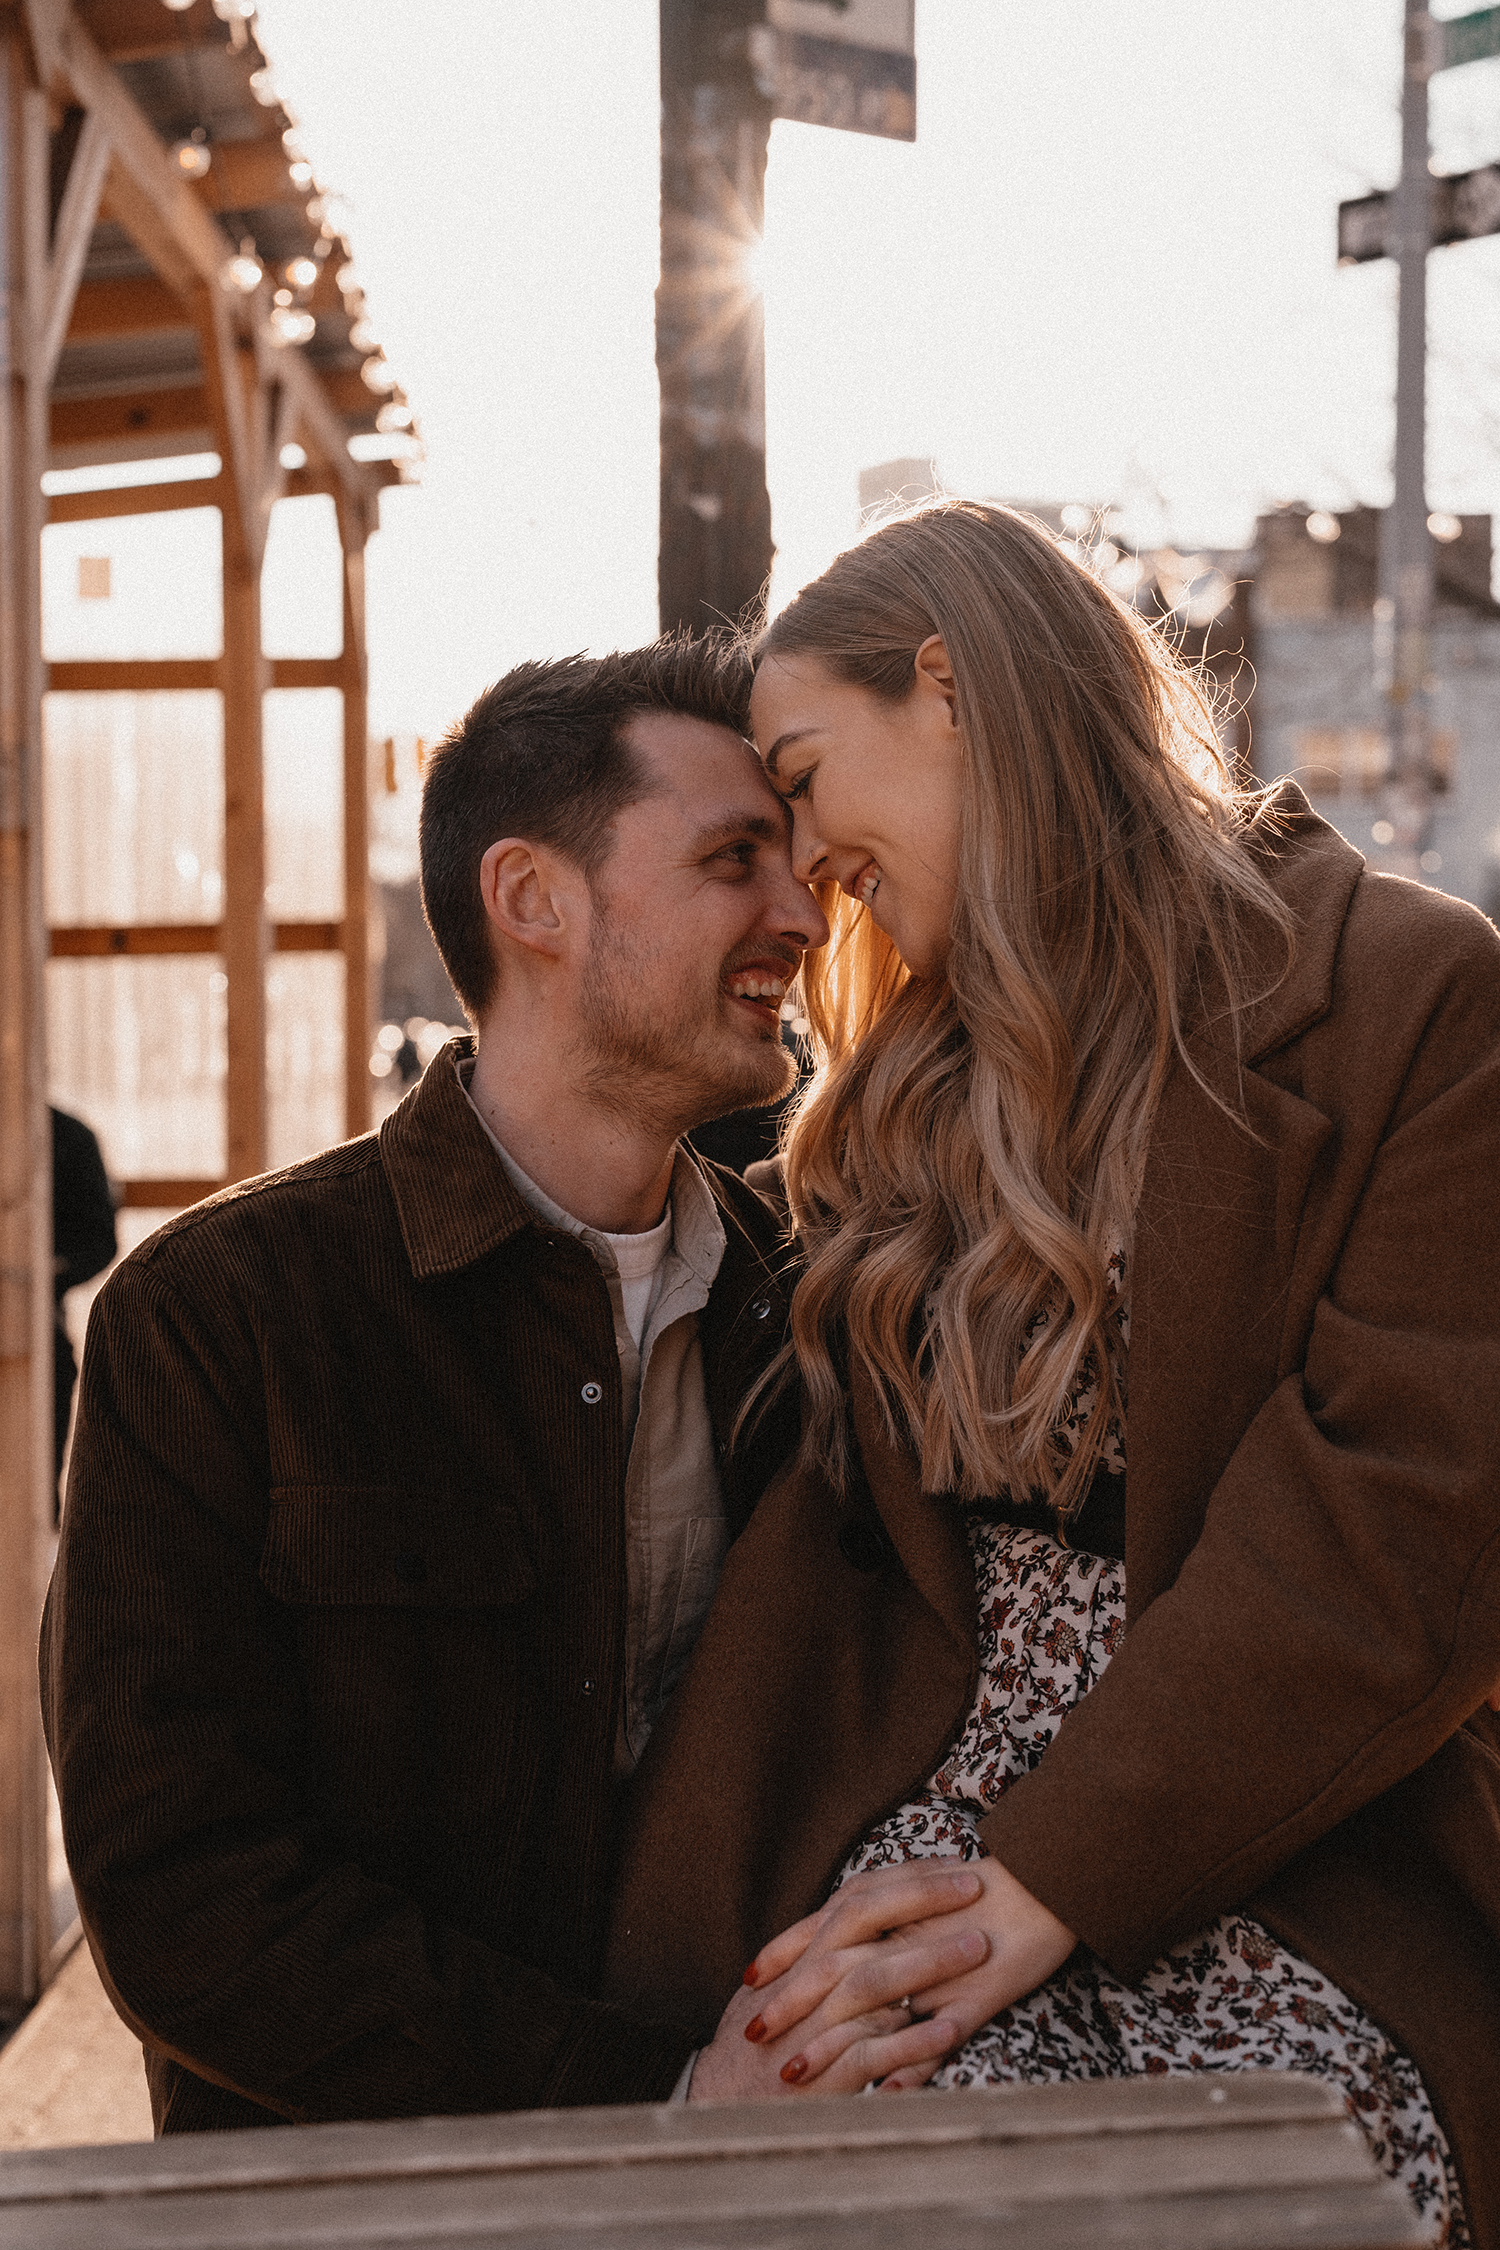 Warm and cuddly engagement photoshoot in Williamsburg.